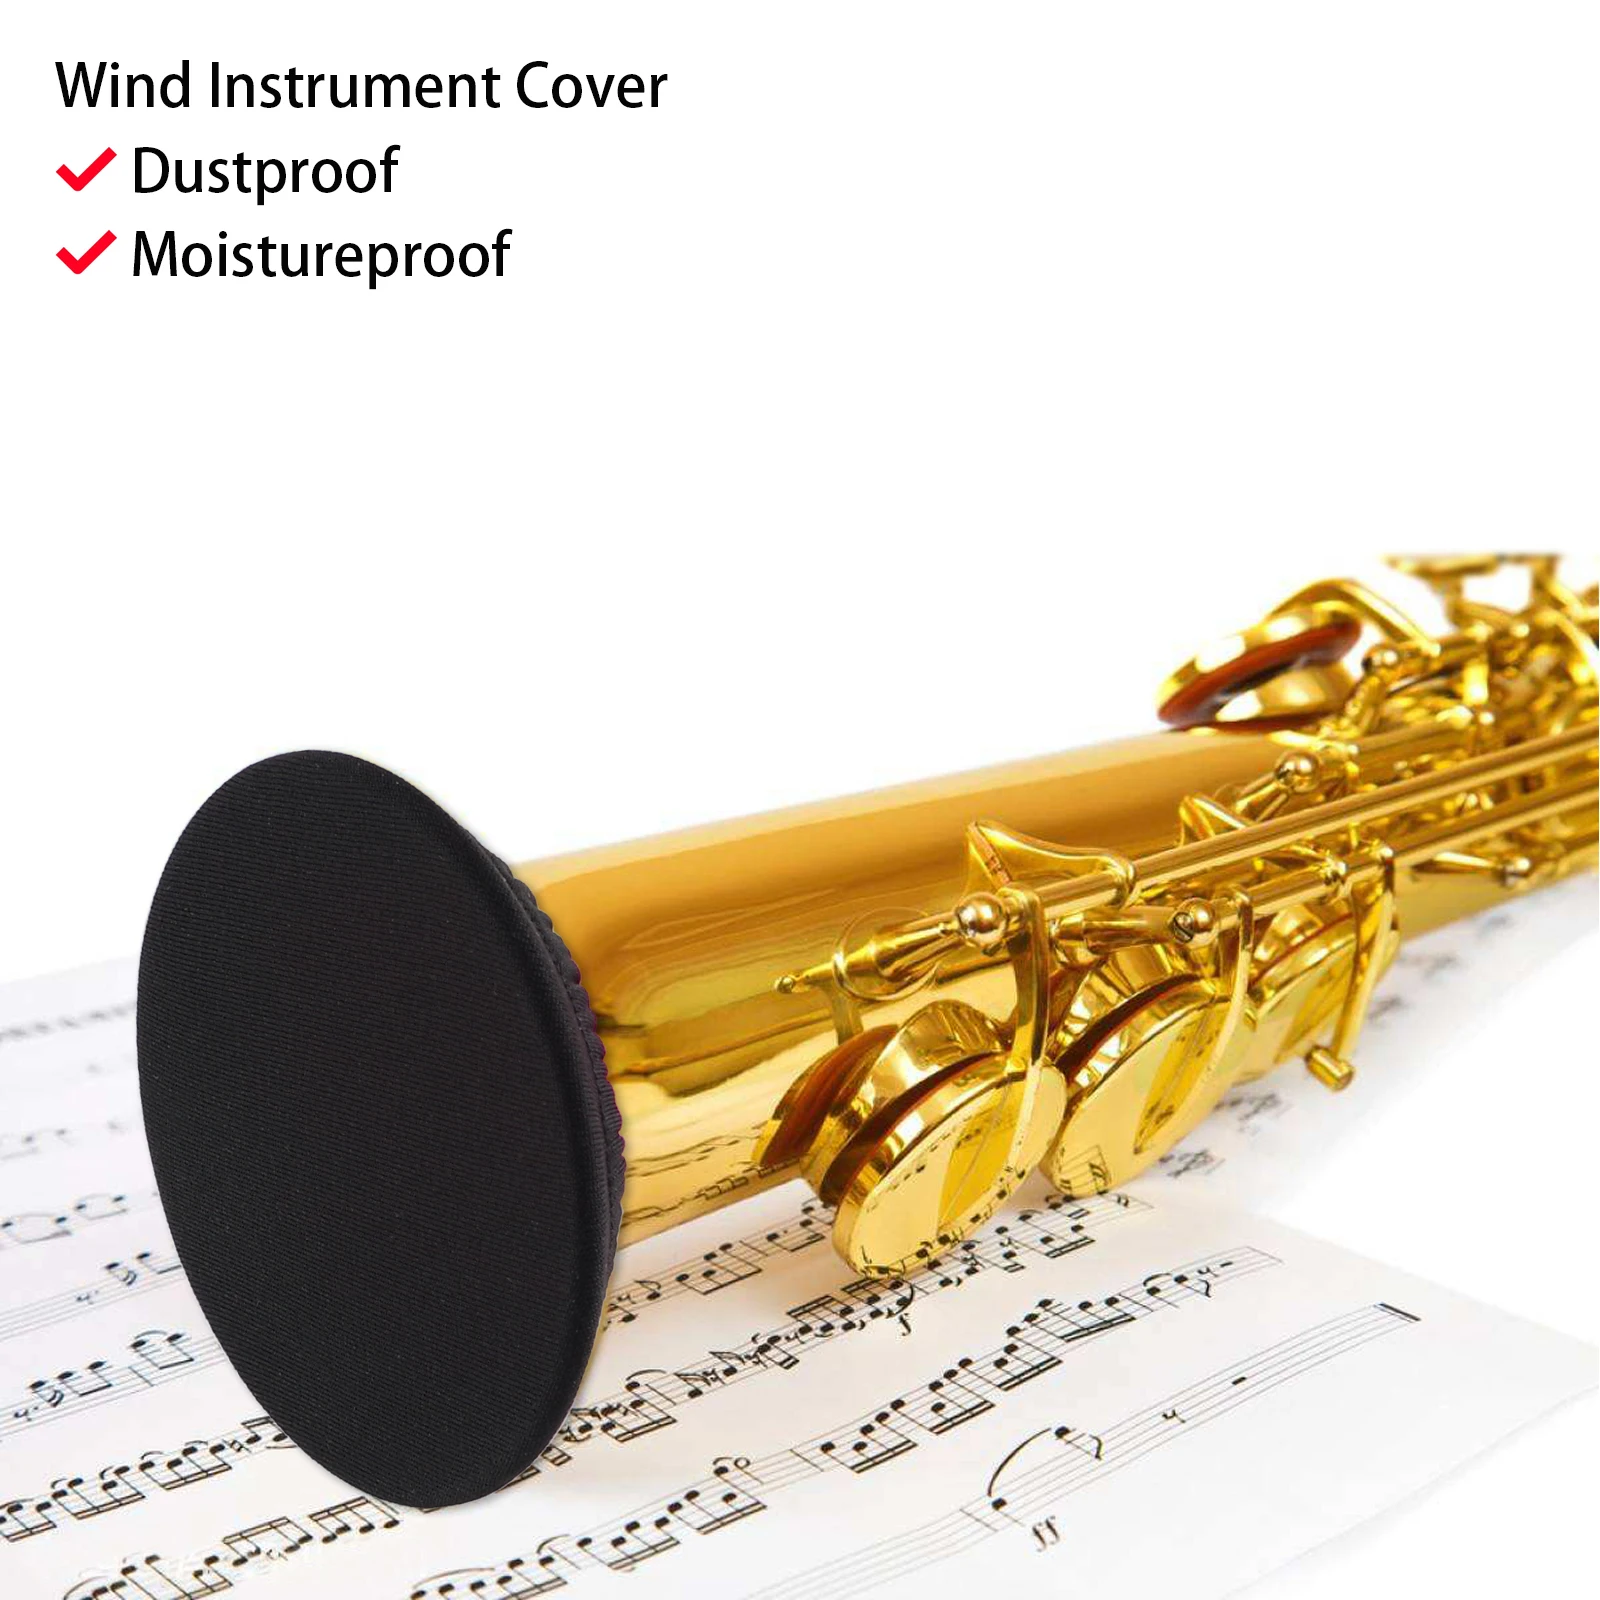 1 Pack 3 inch Brass Bell Cover Cornet Alto Saxophone Dust & Ash Proof Muffler Cap for Clarinet Oboe Trumpet 